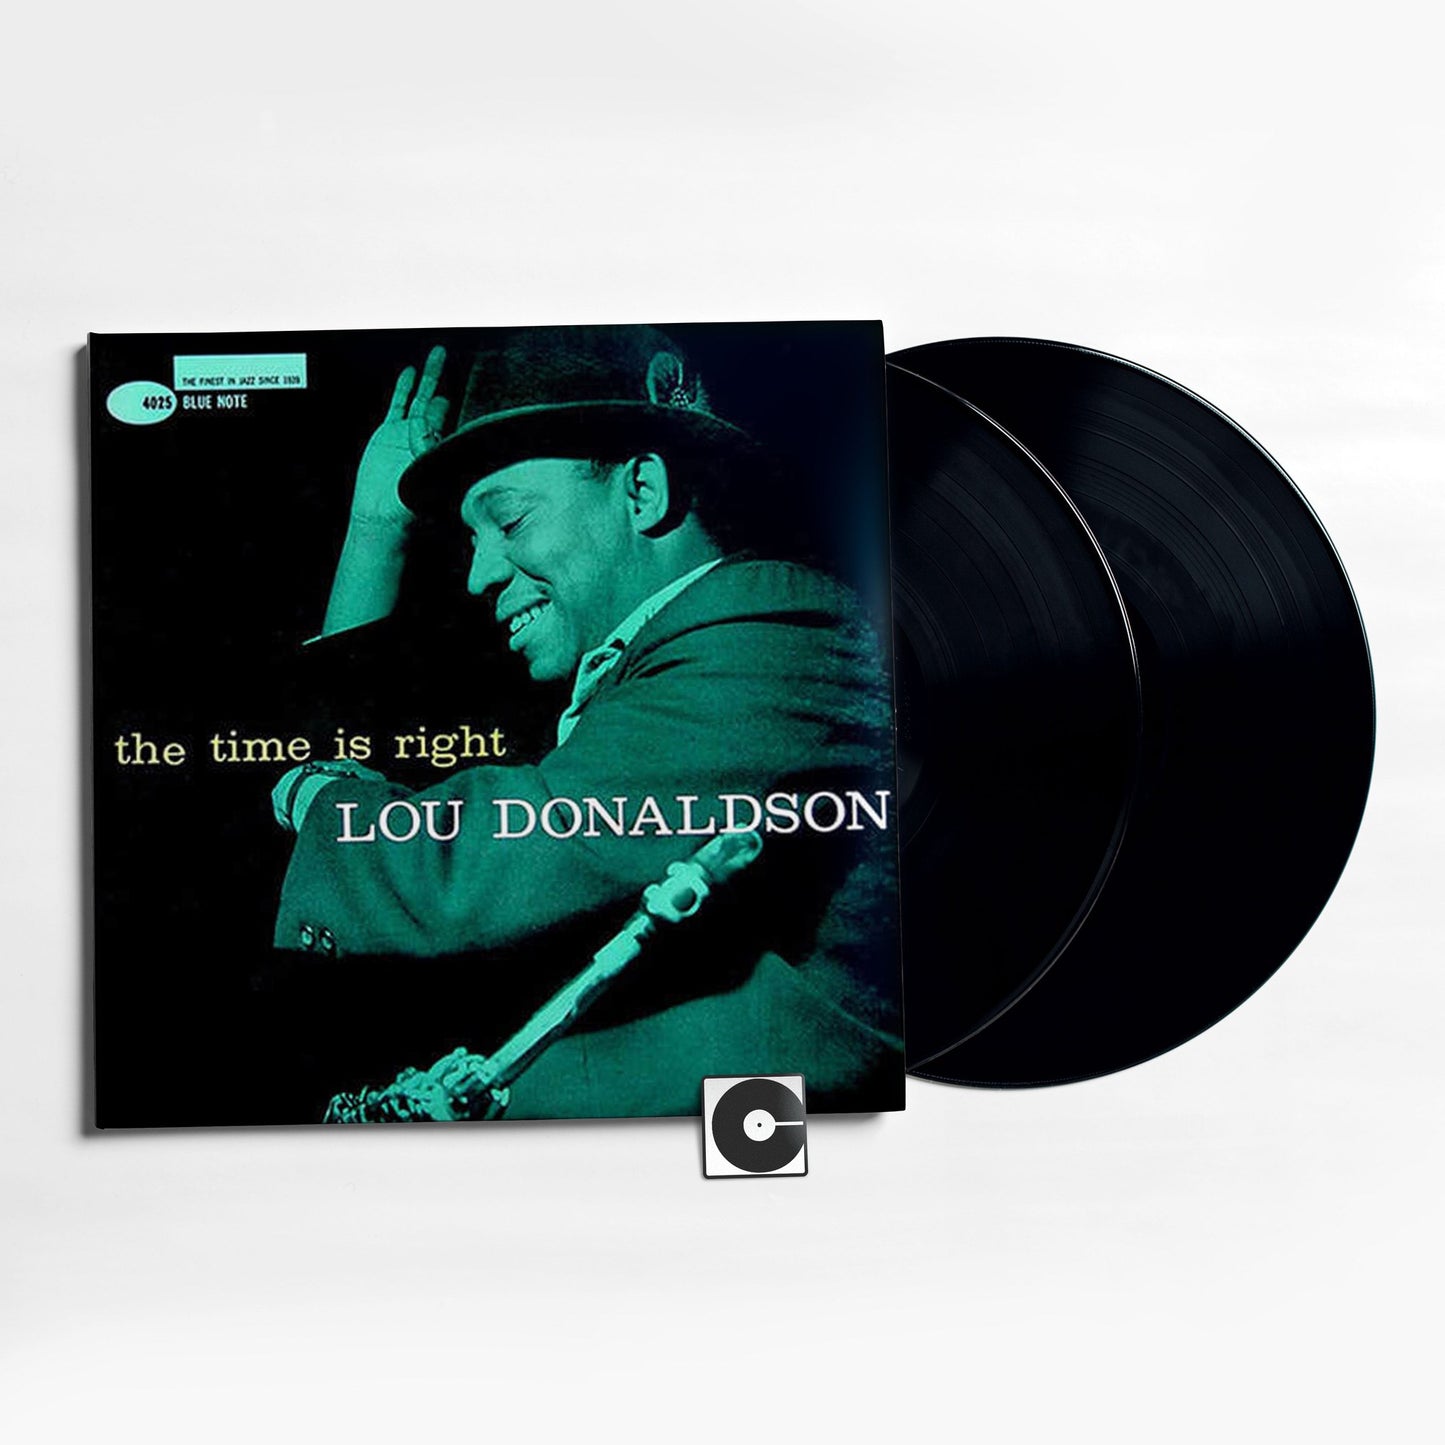 Lou Donaldson - "The Time Is Right" Analogue Productions